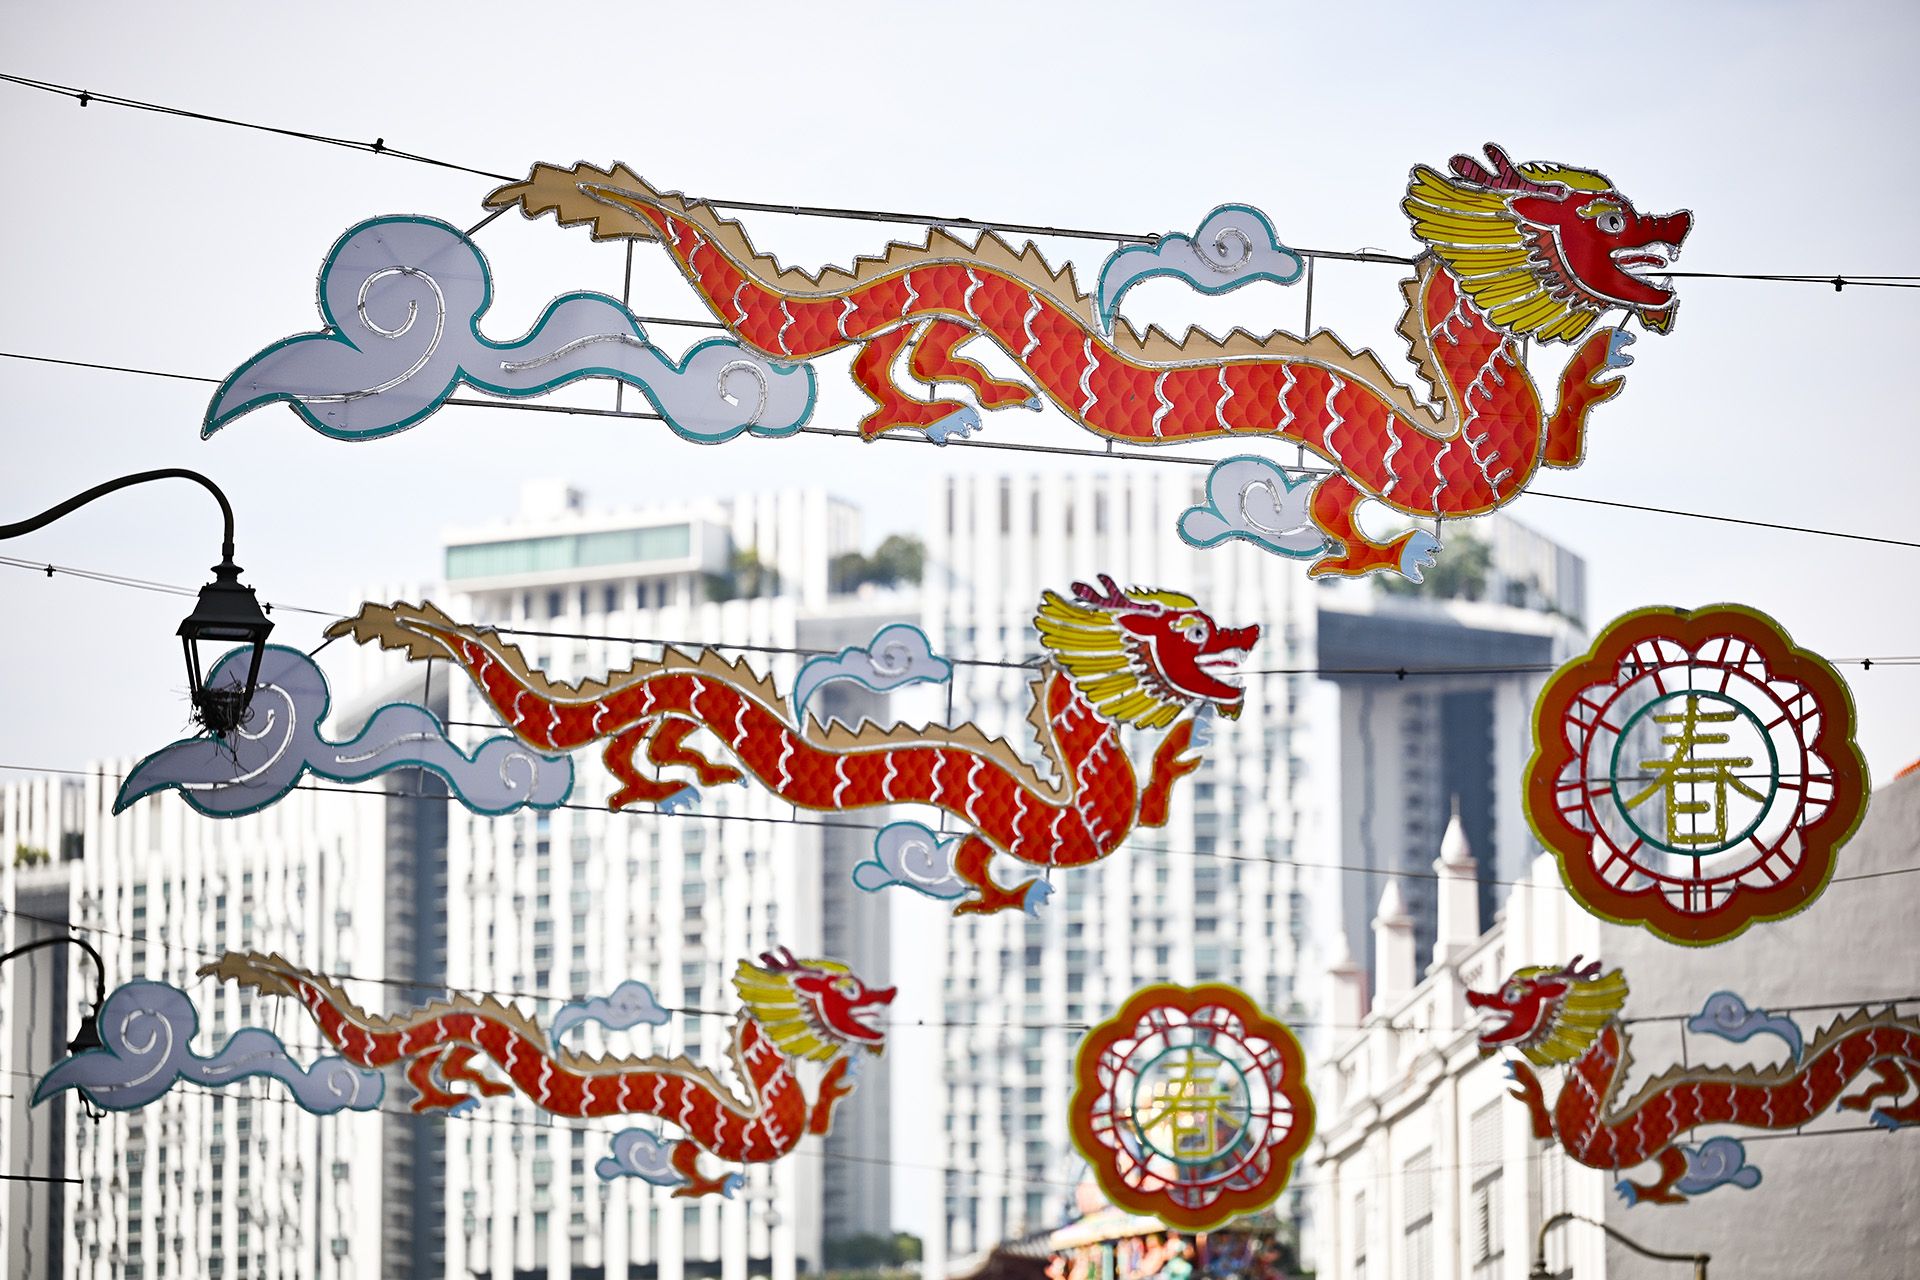 A troop of dragons takes flight overhead at South Bridge Road in Chinatown. Dragon lanterns have set Chinatown aglow every night since Prime Minister Lee Hsien Loong launched the annual Chinese New Year street light-up at Kreta Ayer Square on Jan 19. ST PHOTO: LIM YAOHUI